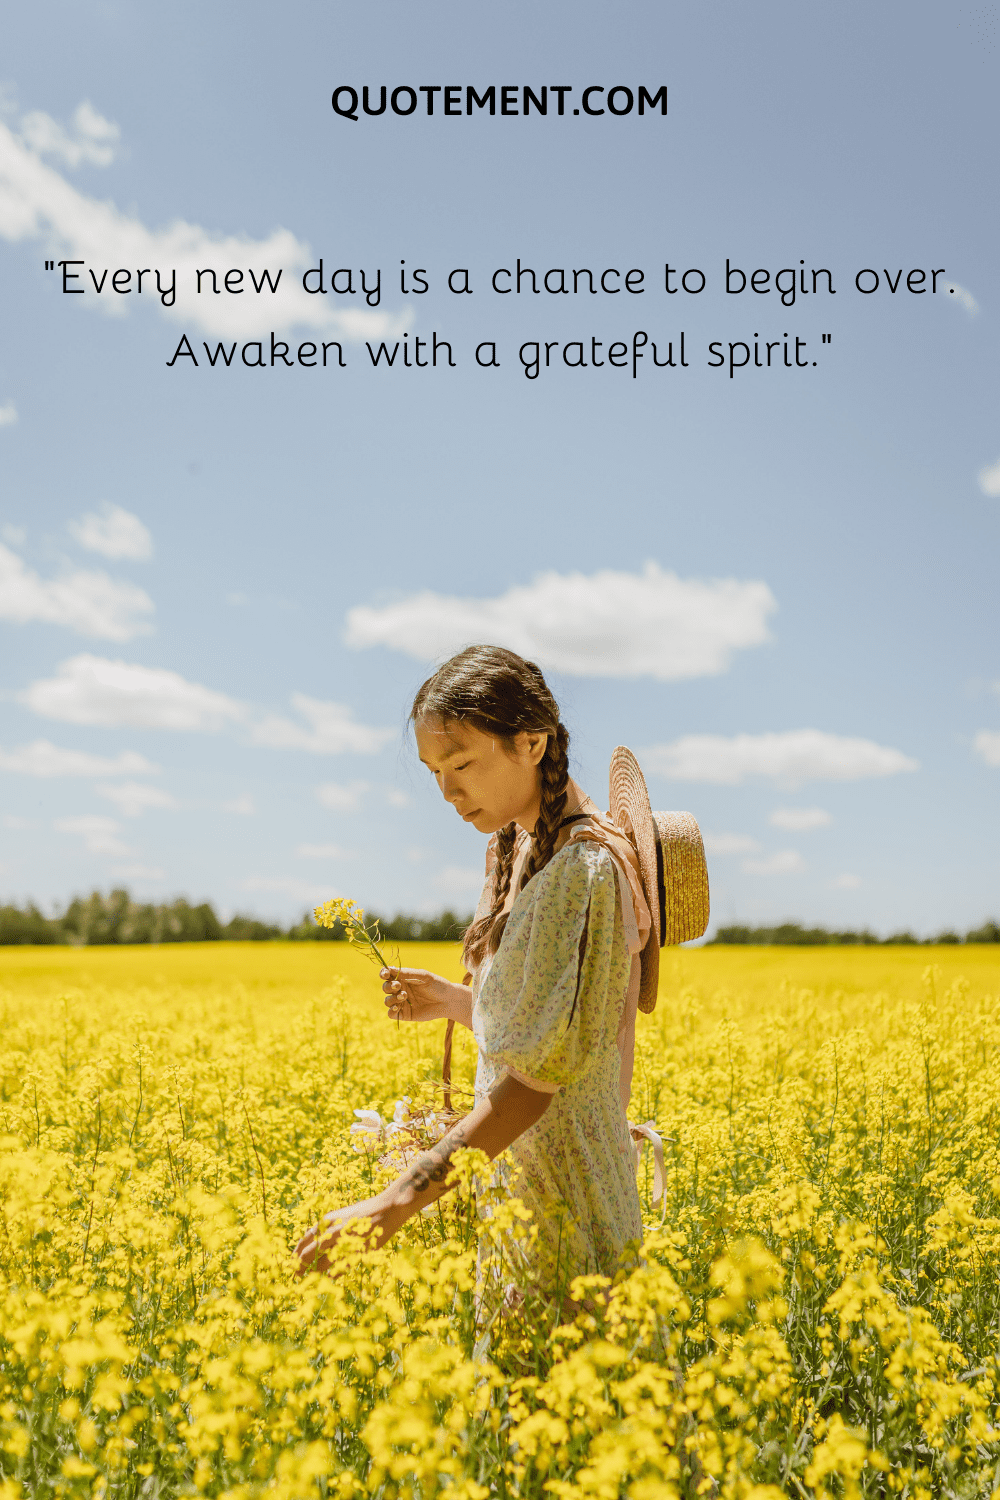 Every new day is a chance to begin over